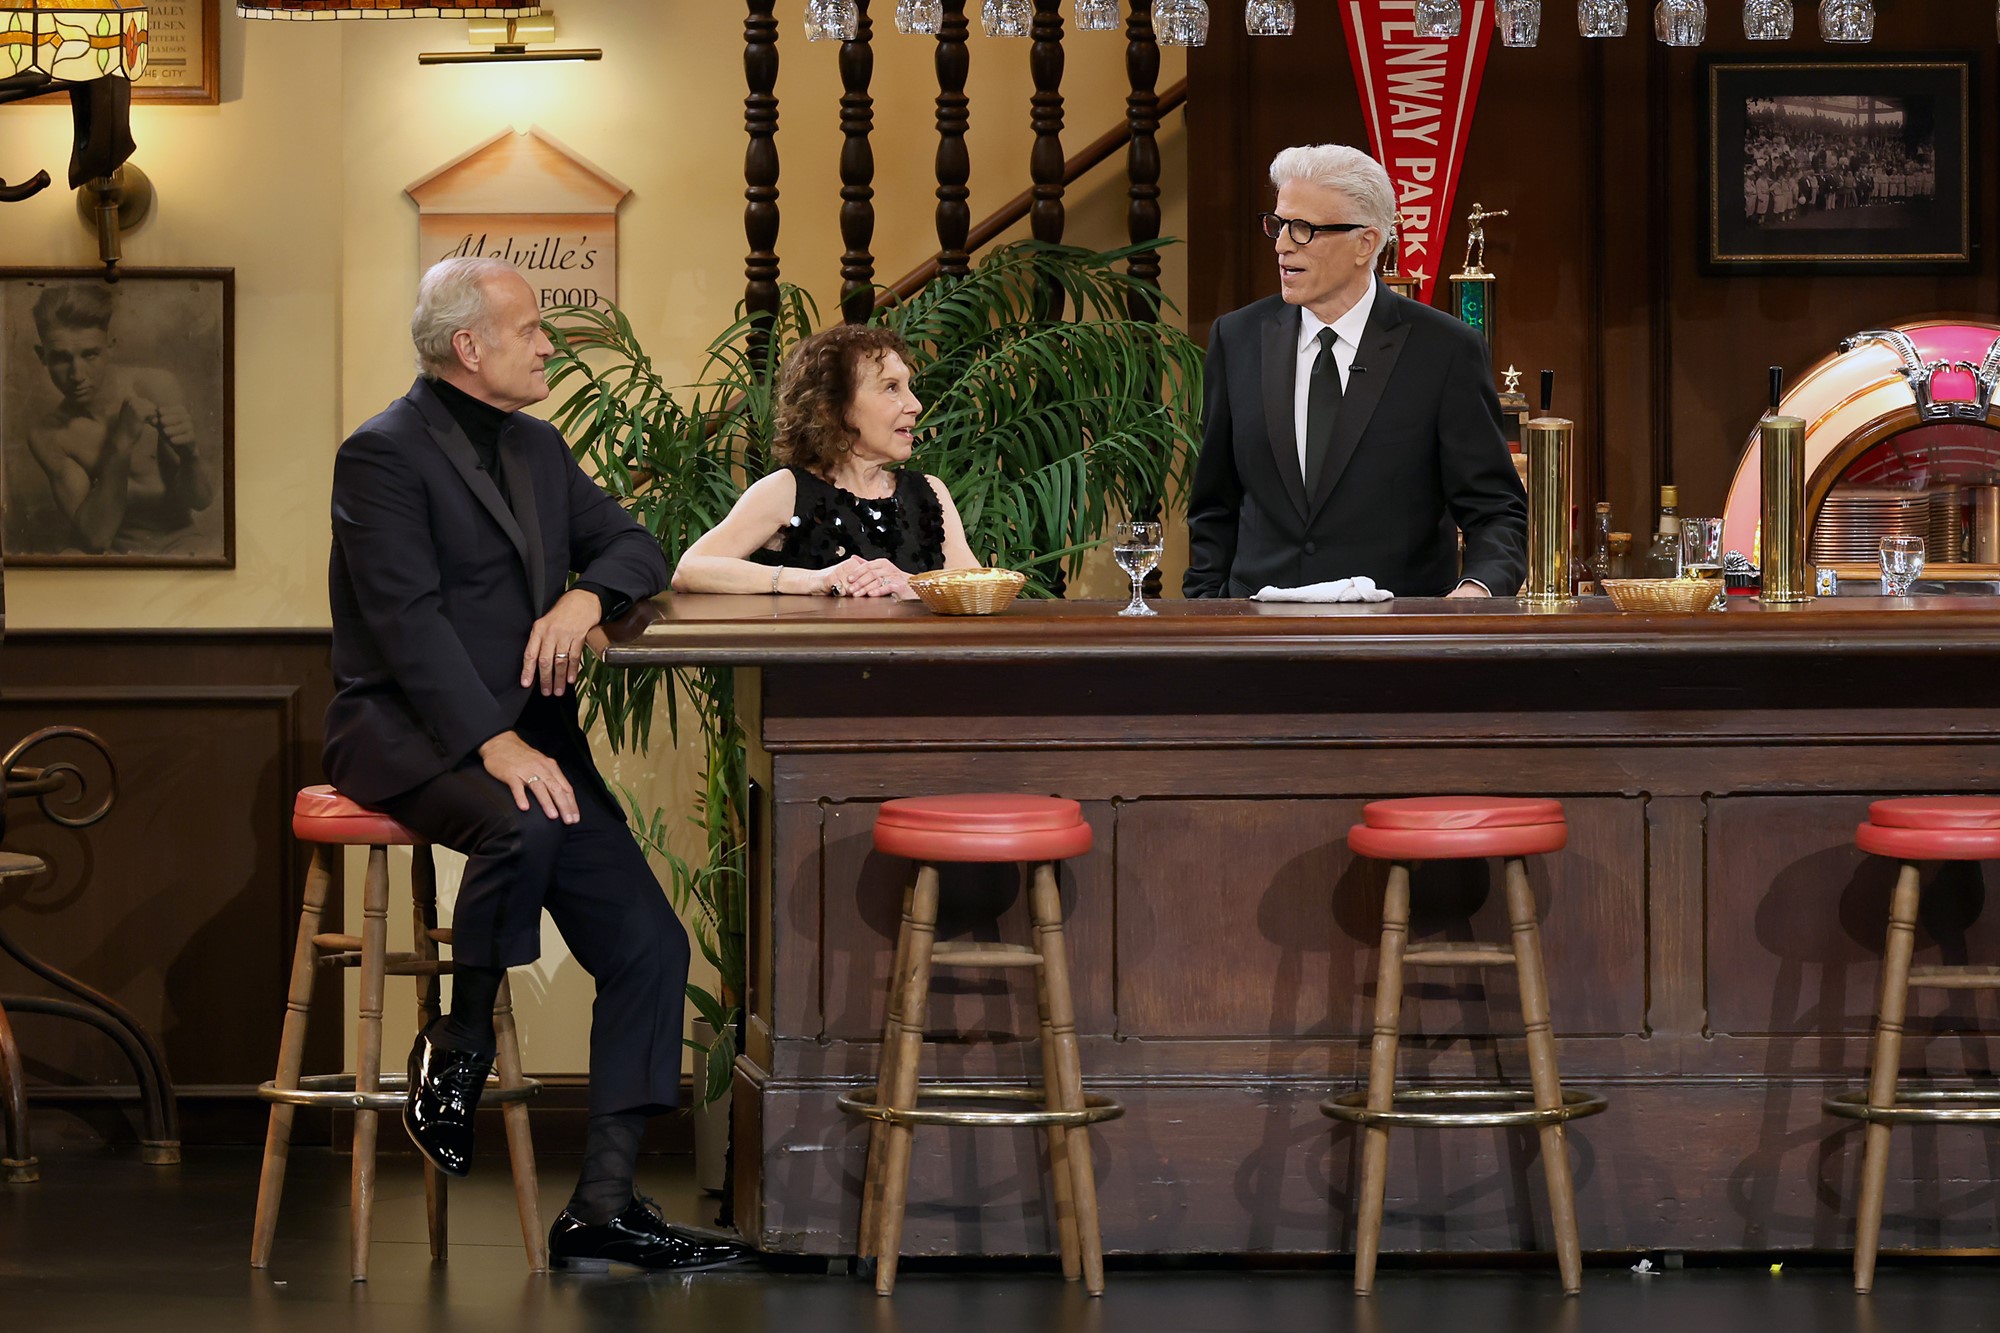 Kelsey Grammer, Rhea Perlman, and Ted Danson sitting around a bar. 